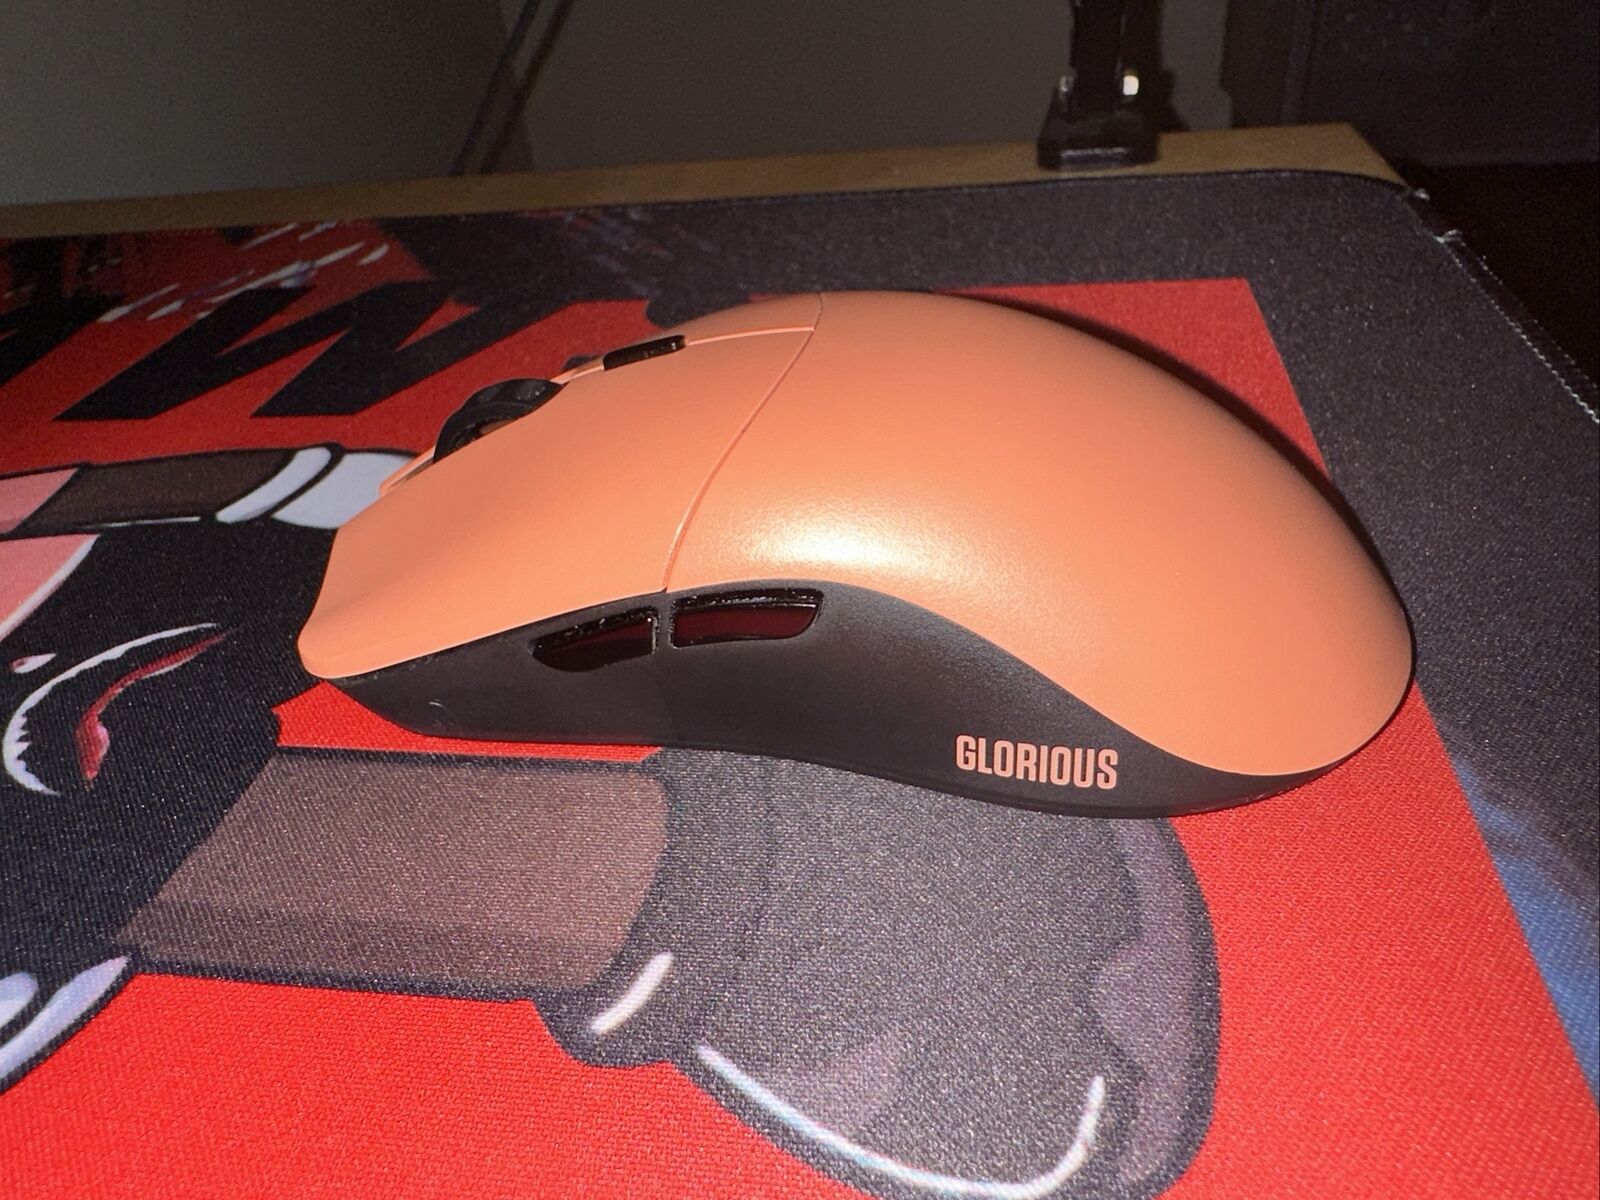 *NEW * Glorious Model O Pro Wireless Gaming Mouse - Red Fox